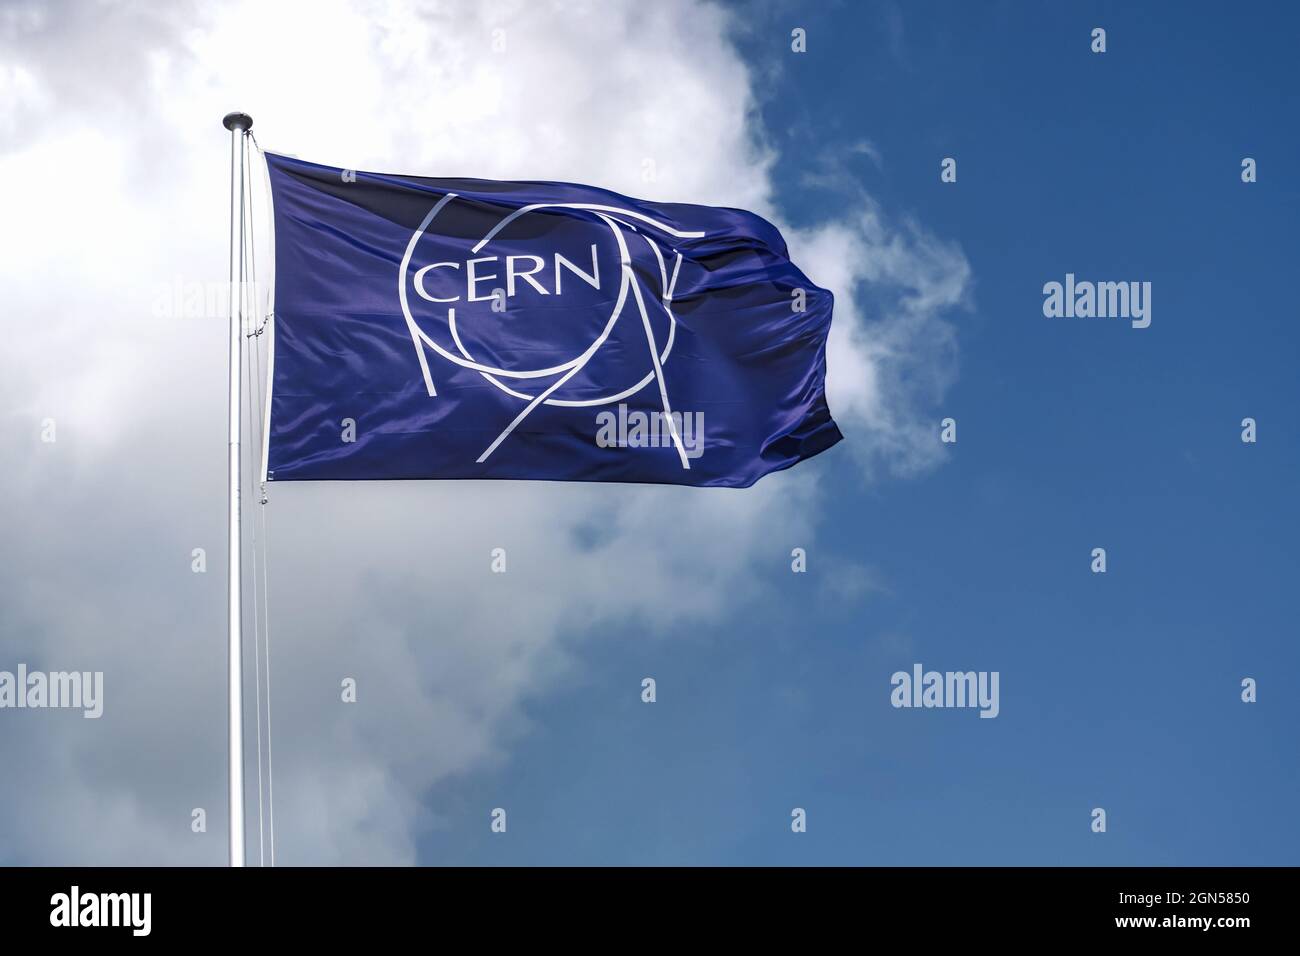 Flag of CERN. Logo, symbol of the European Organization for Nuclear Research, operating the largest particle physics laboratory in the world. Stock Photo